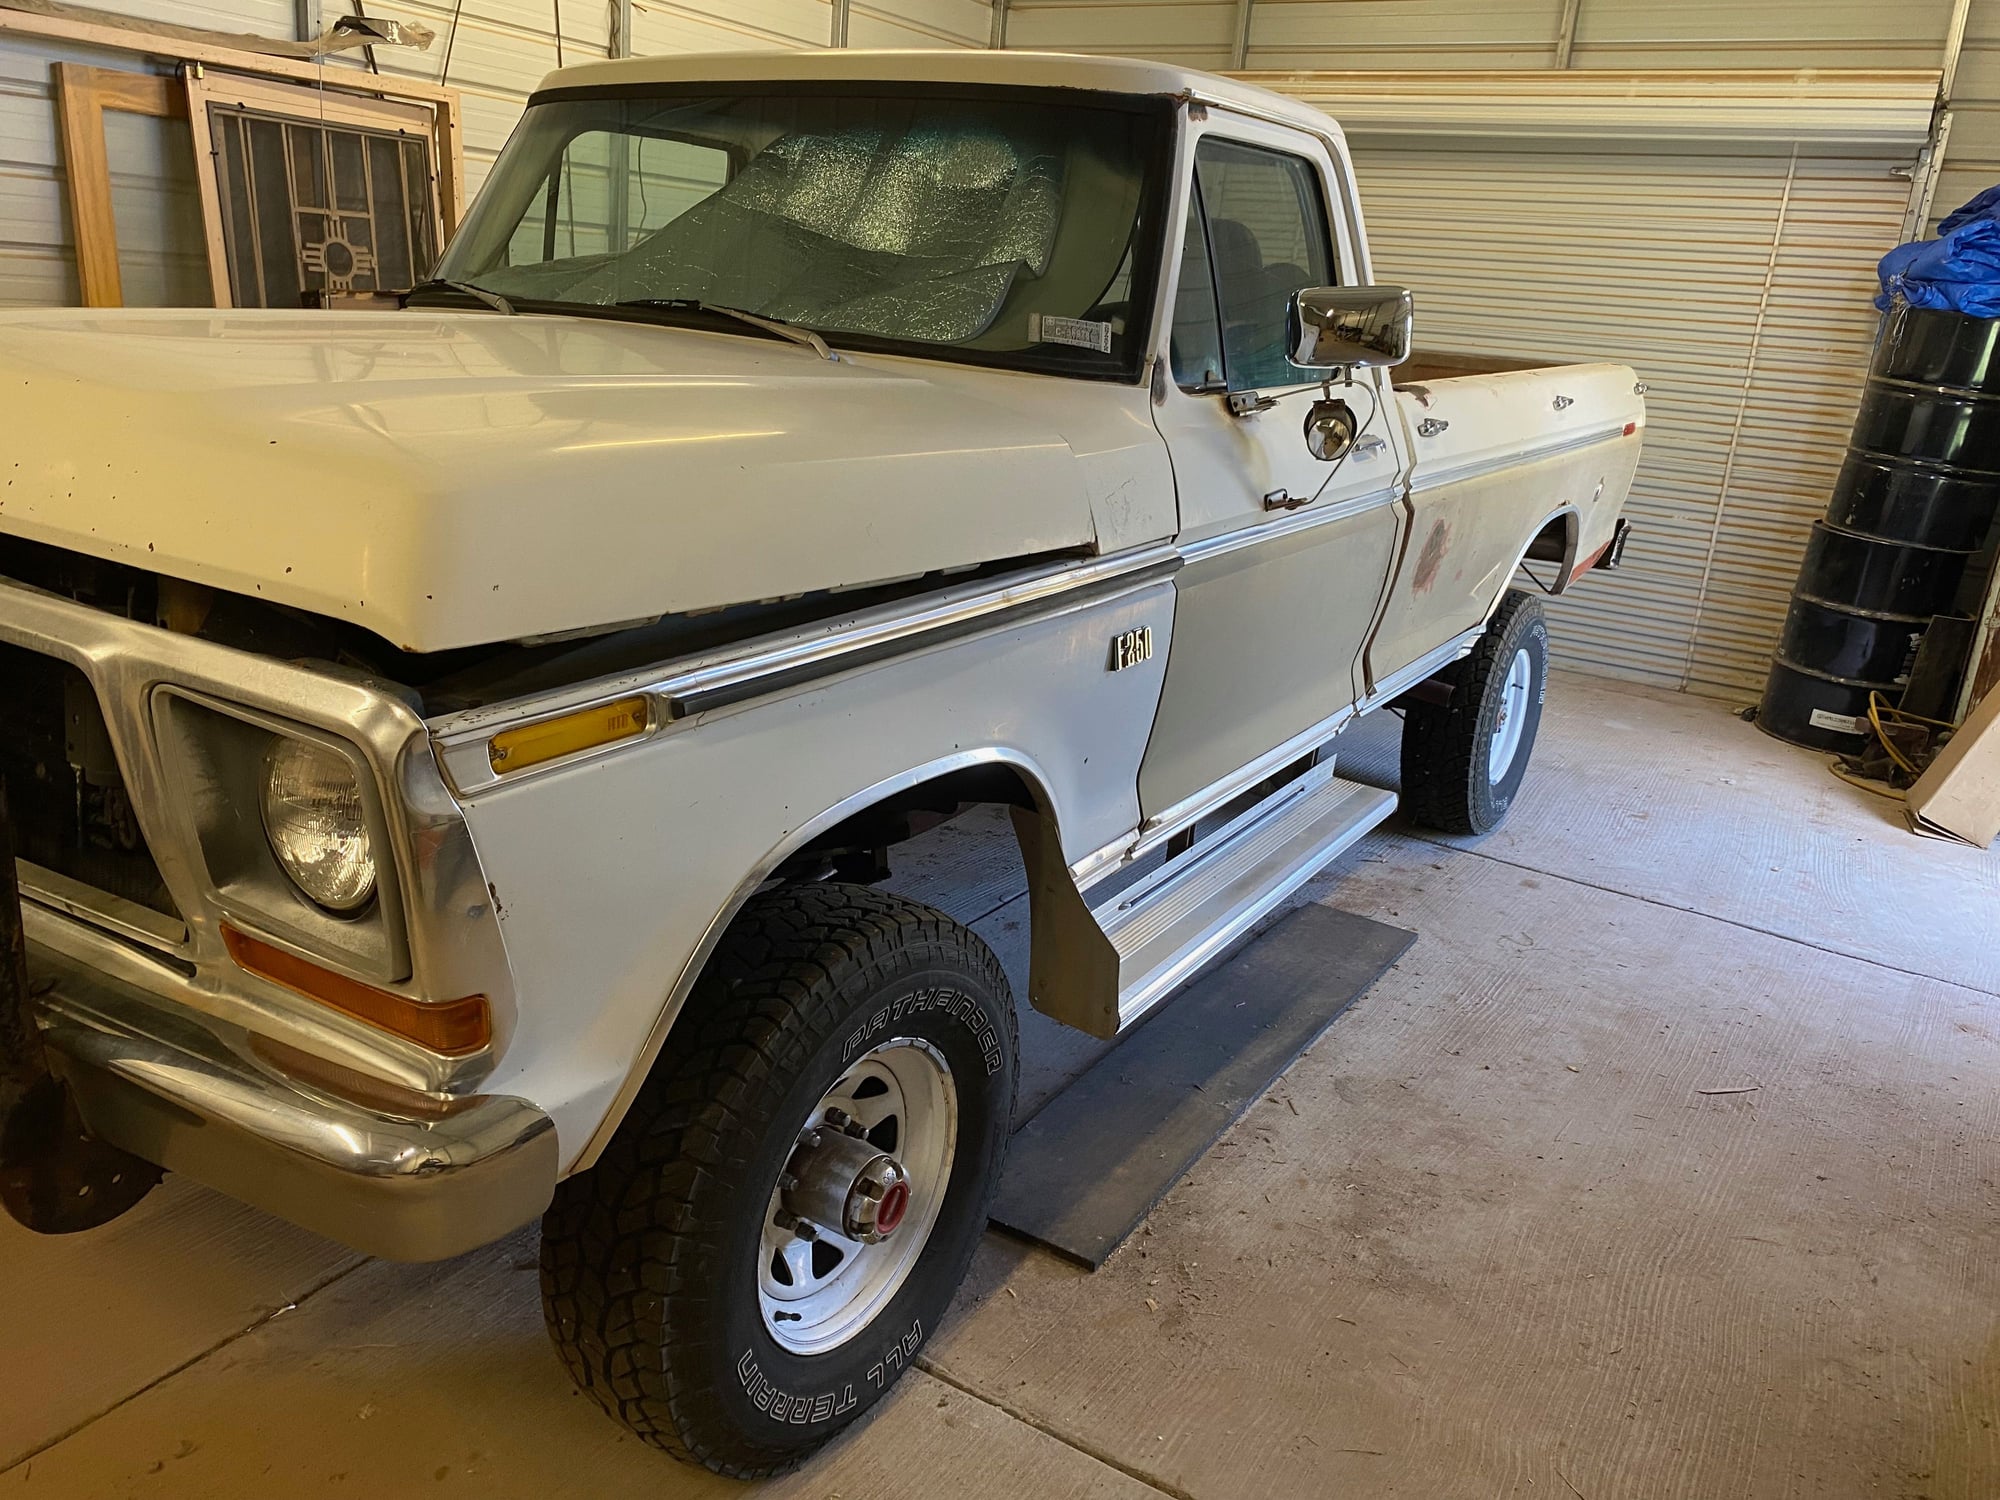 1976 Ford F-250 - 1976 hiboy 4x4 with granny 4speed - Used - Edgewood, NM 87015, United States